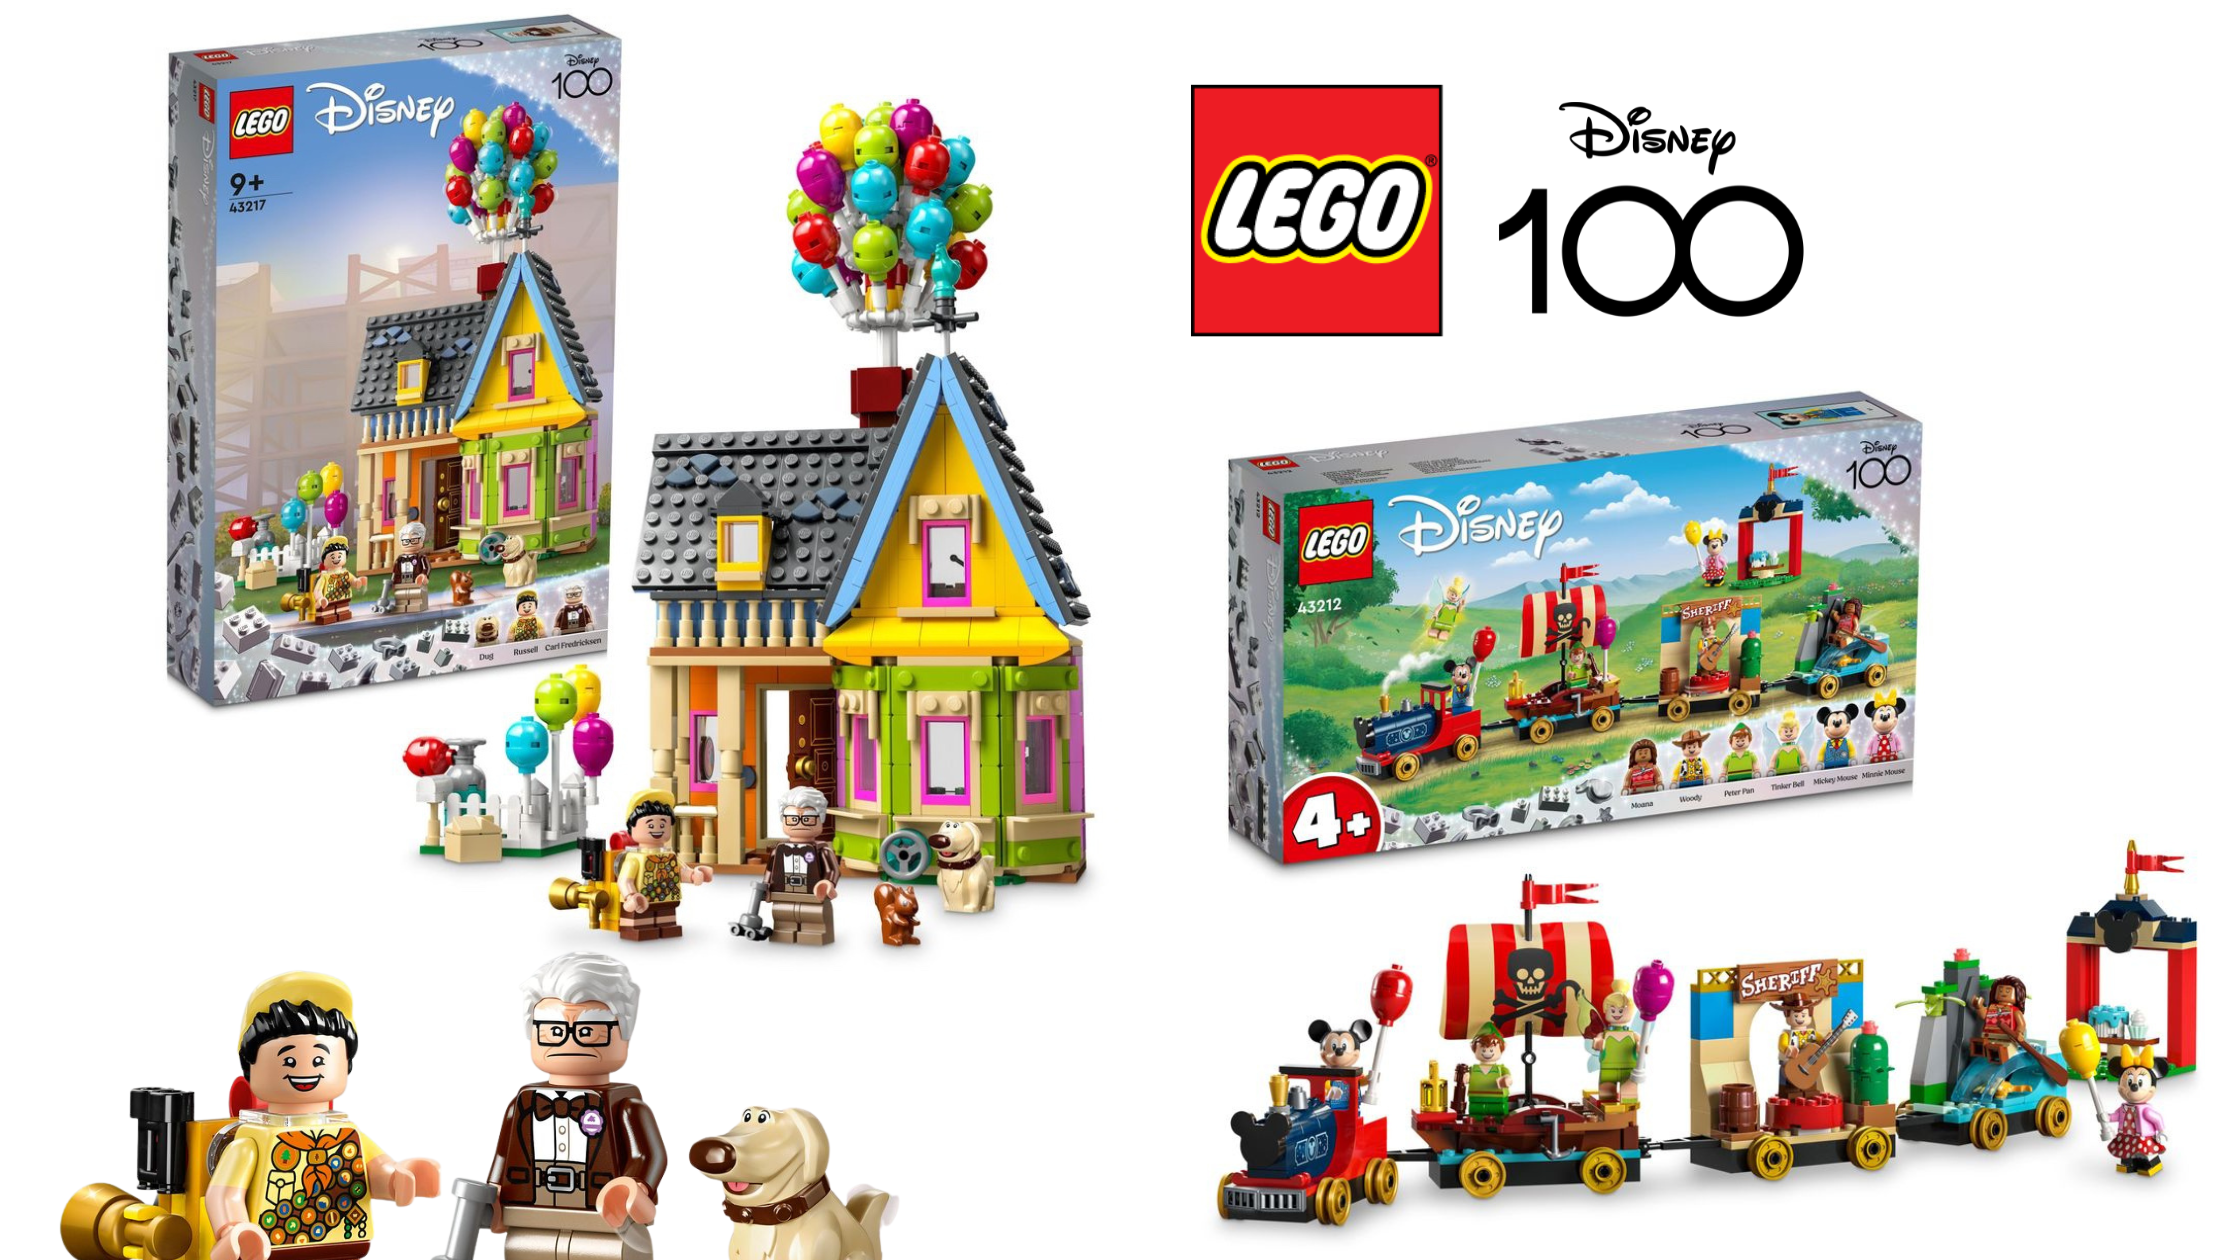 LEGO's New Disney 100th Anniversary Sets Include the Up House, Minifigure  Series & More + Review! 